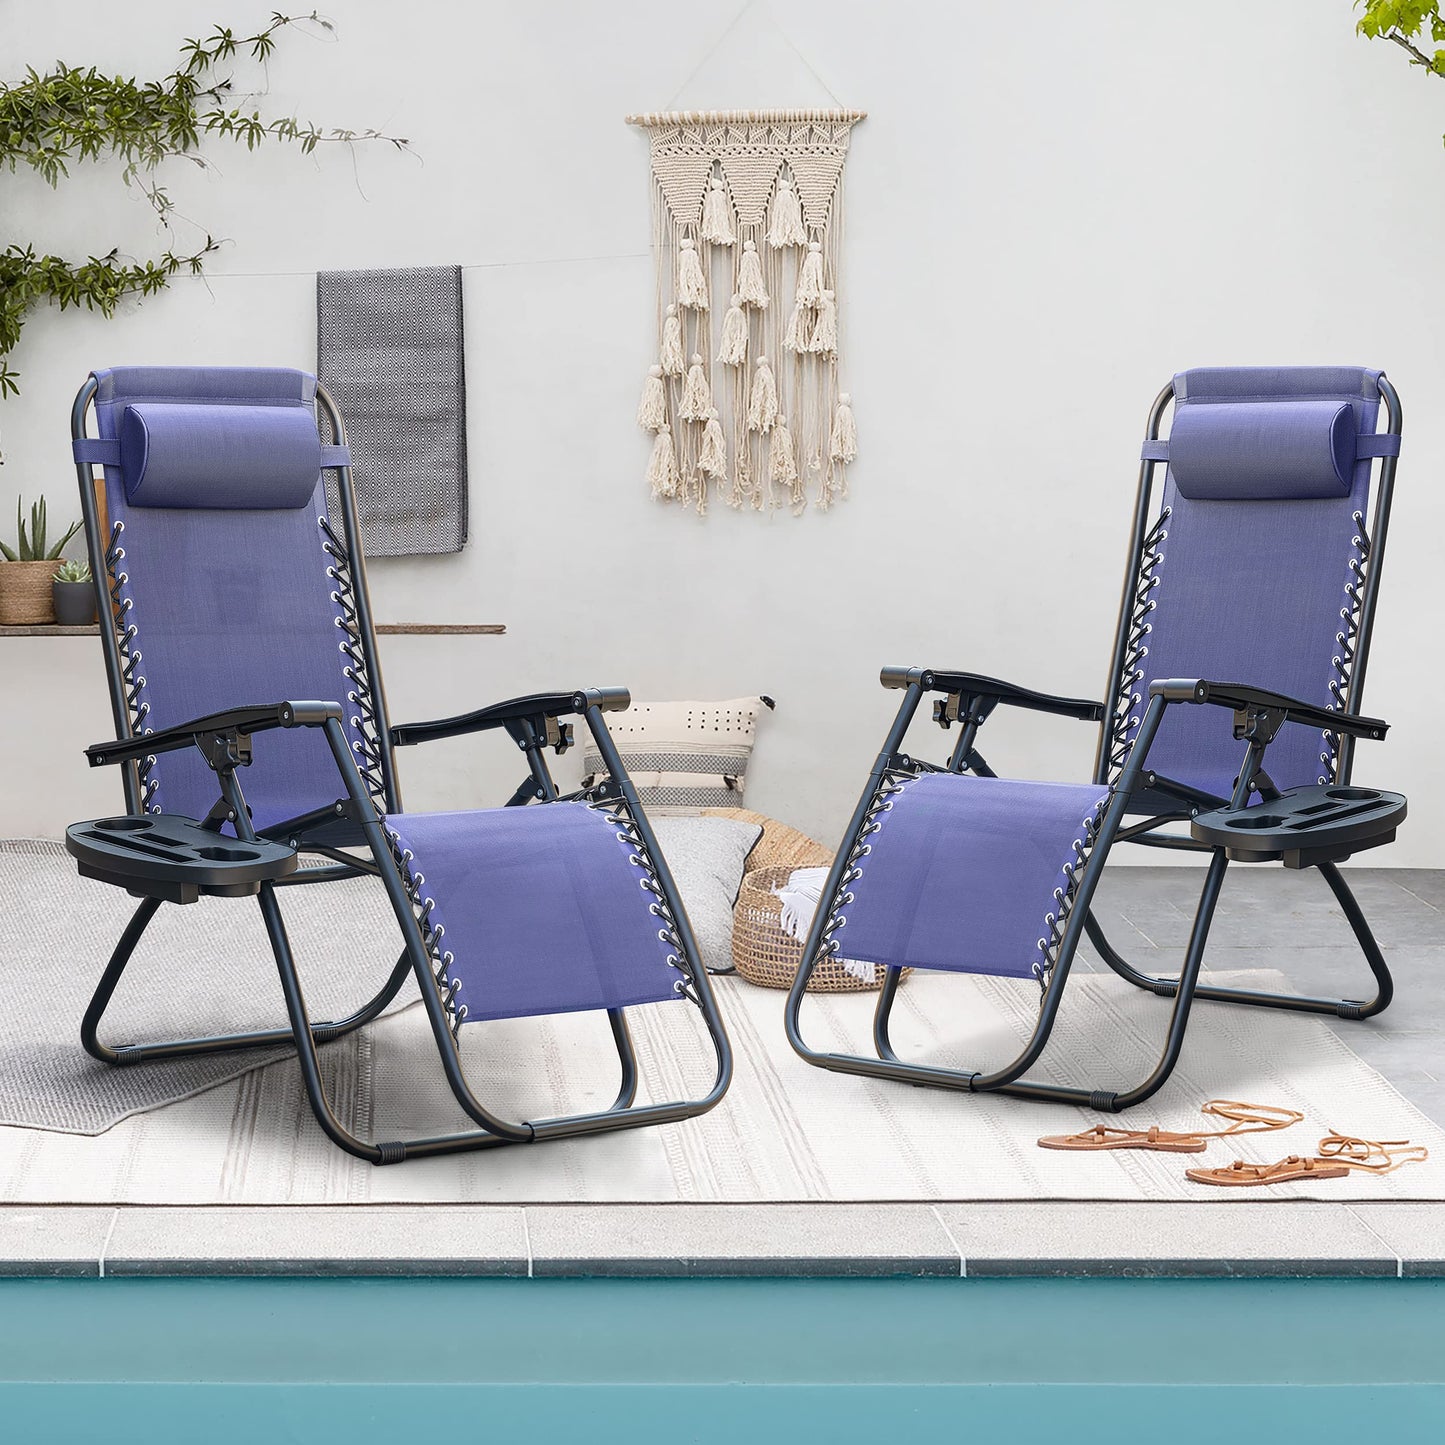 Boho Zero Gravity Chairs: Folding Outdoor Lounge Set - Reclining Chairs with Cup Holder and Pillows - Perfect for Poolside, Backyard, or Beach - Available in Various Colors!